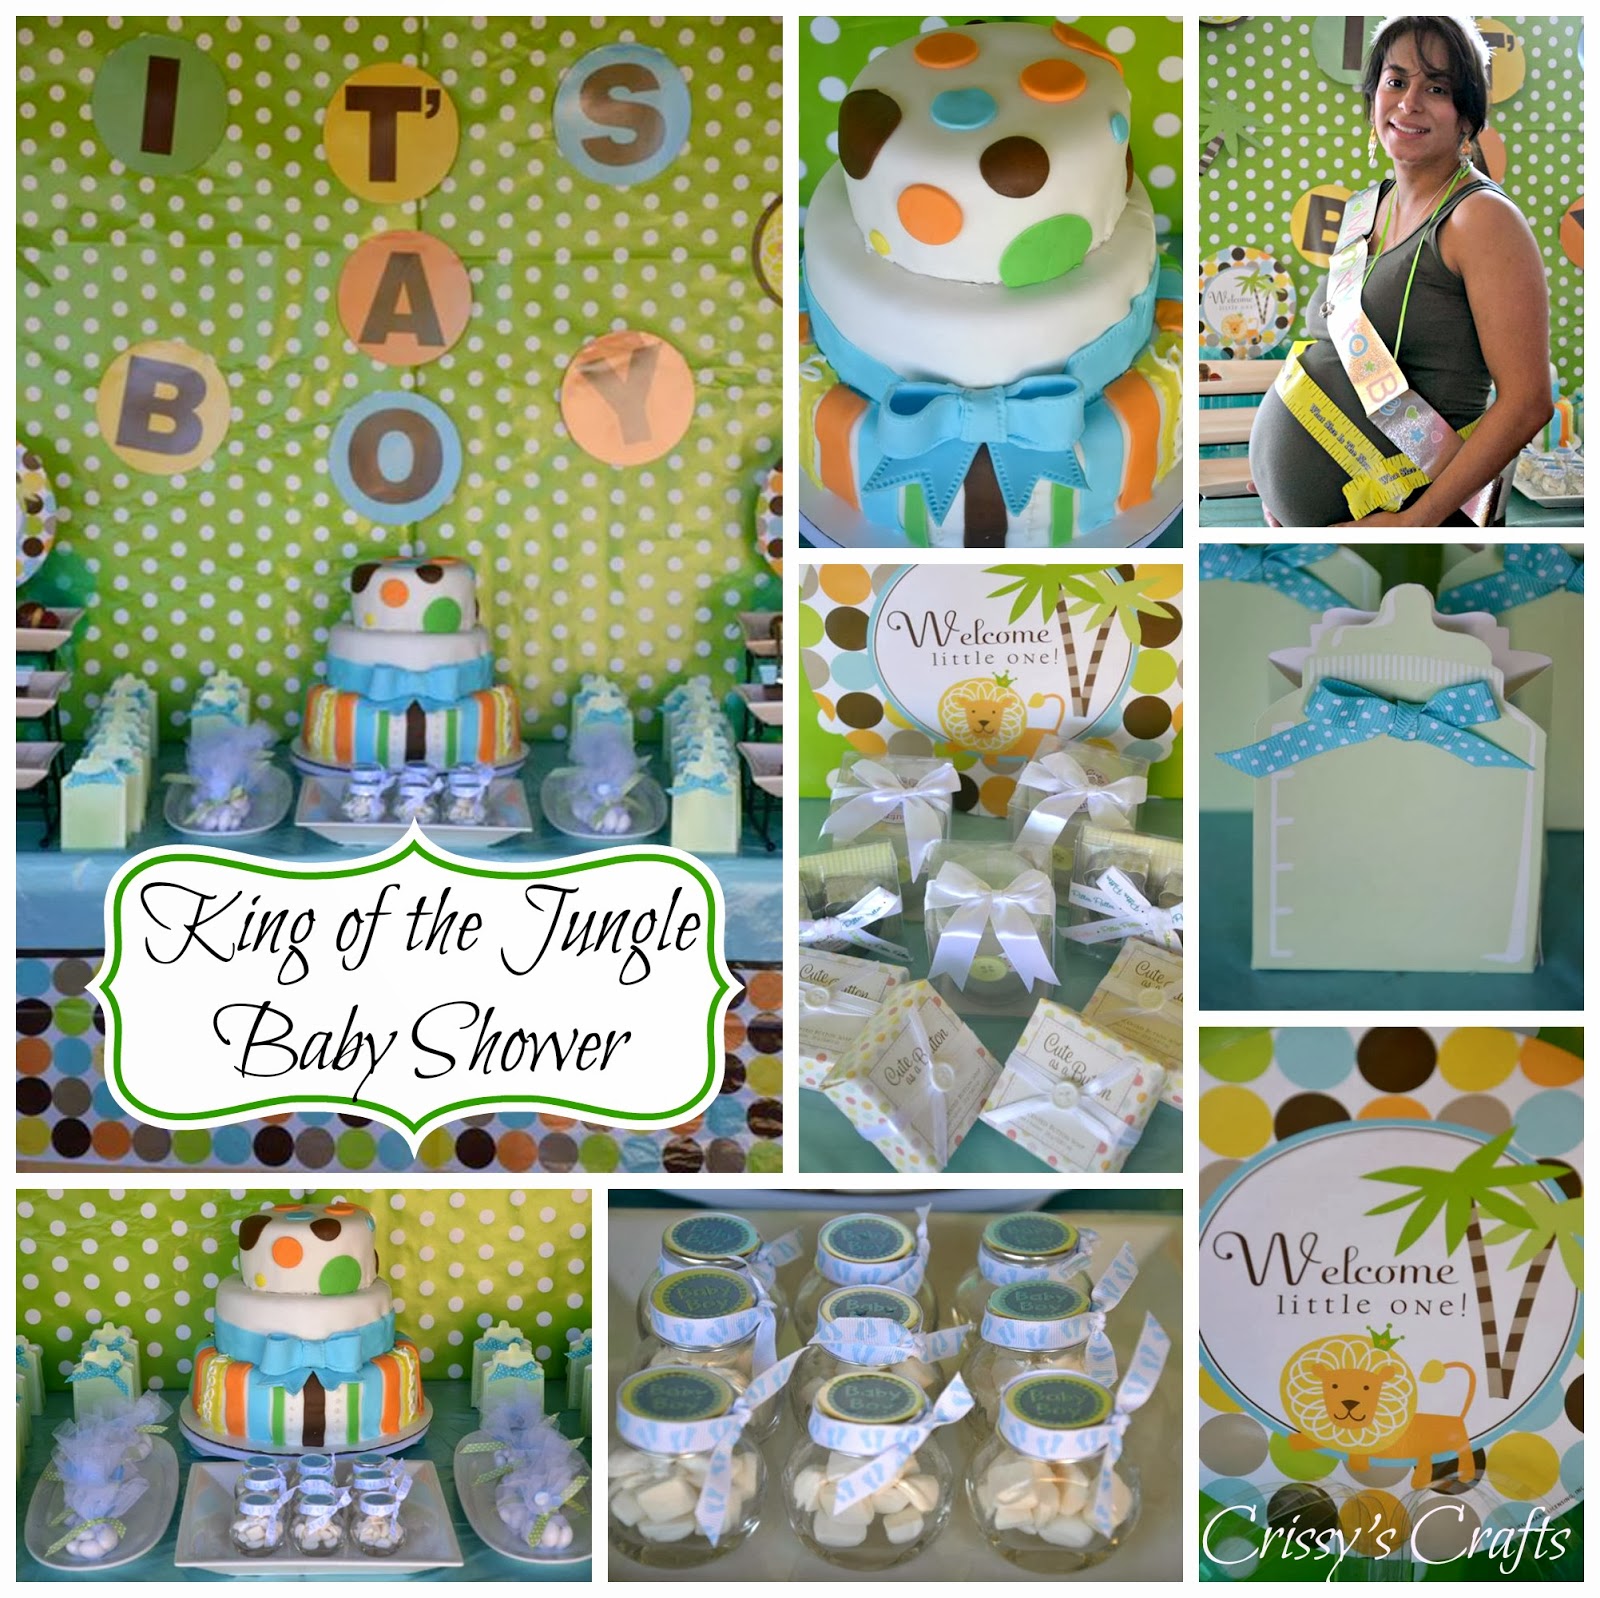 65 New baby shower party favors at party city 394   the Jungle Baby Shower party supplies from Party City . So Adorable 